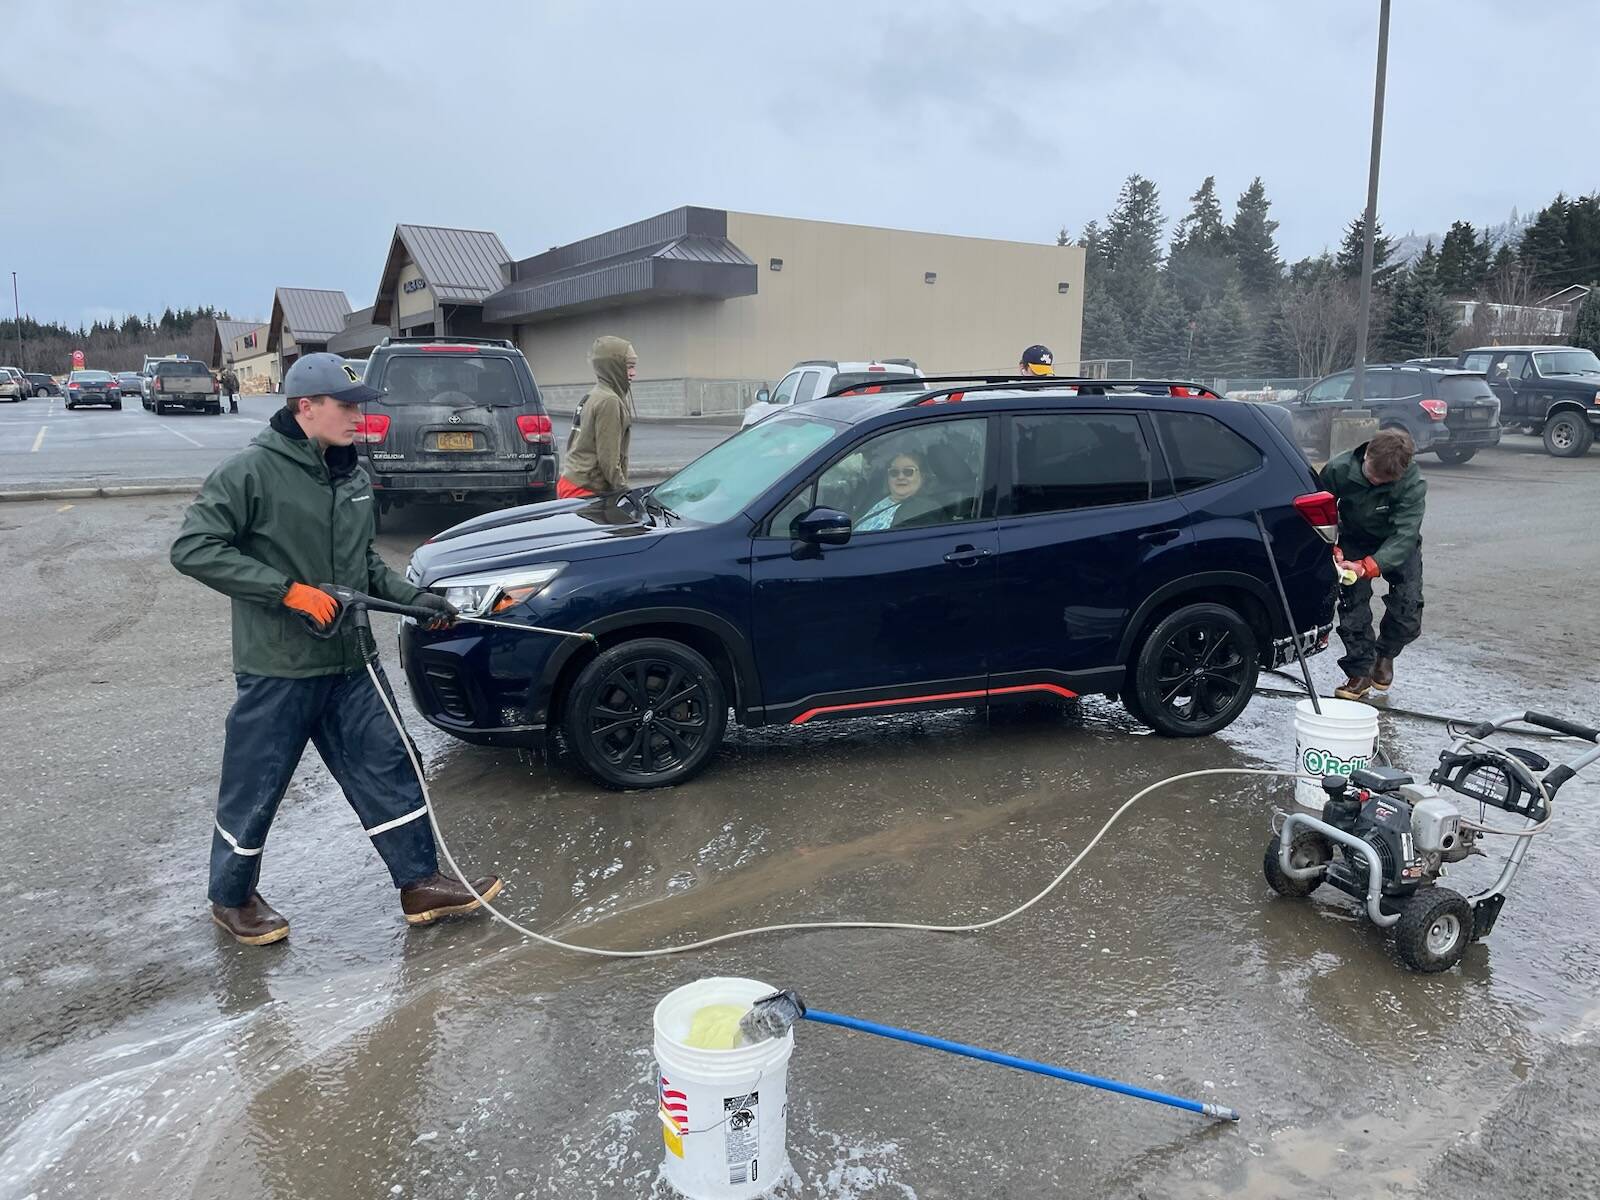 Homer High School Mariners hold their annual car washer fundraiser for HHS Mariner baseball on Saturday<ins>, April 15, 2023</ins> in the parking lot of Wells Fargo<ins> in Homer, Alaska</ins>. (Photo provided by Kate Crowley)